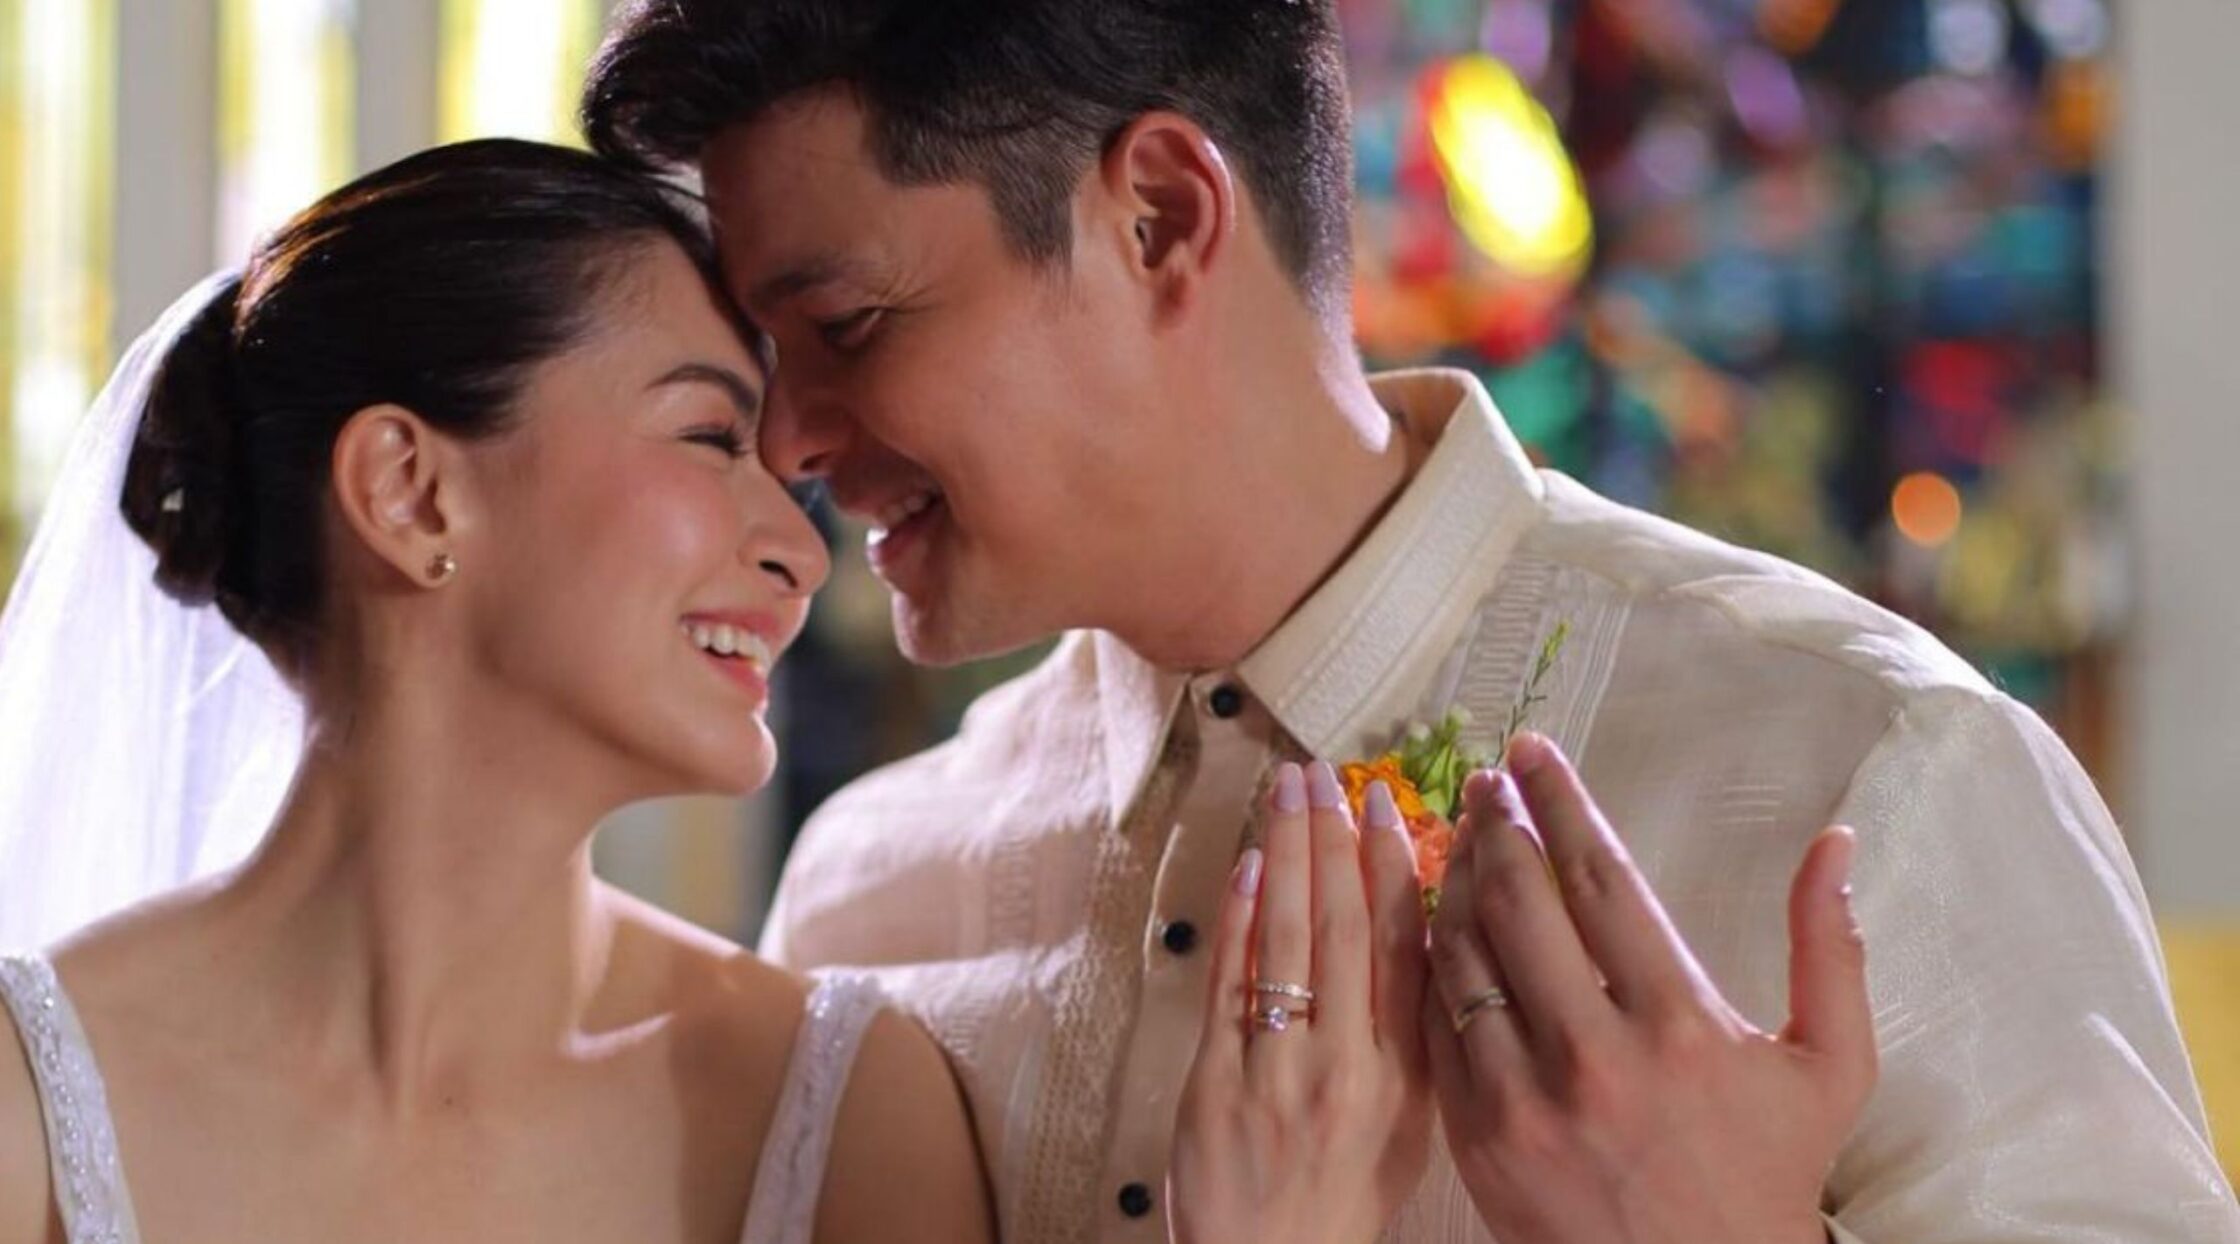 The movie Rewind is a heartwarming tale of John (played by Dingdong Dantes) and Mary (played by Marian Rivera).